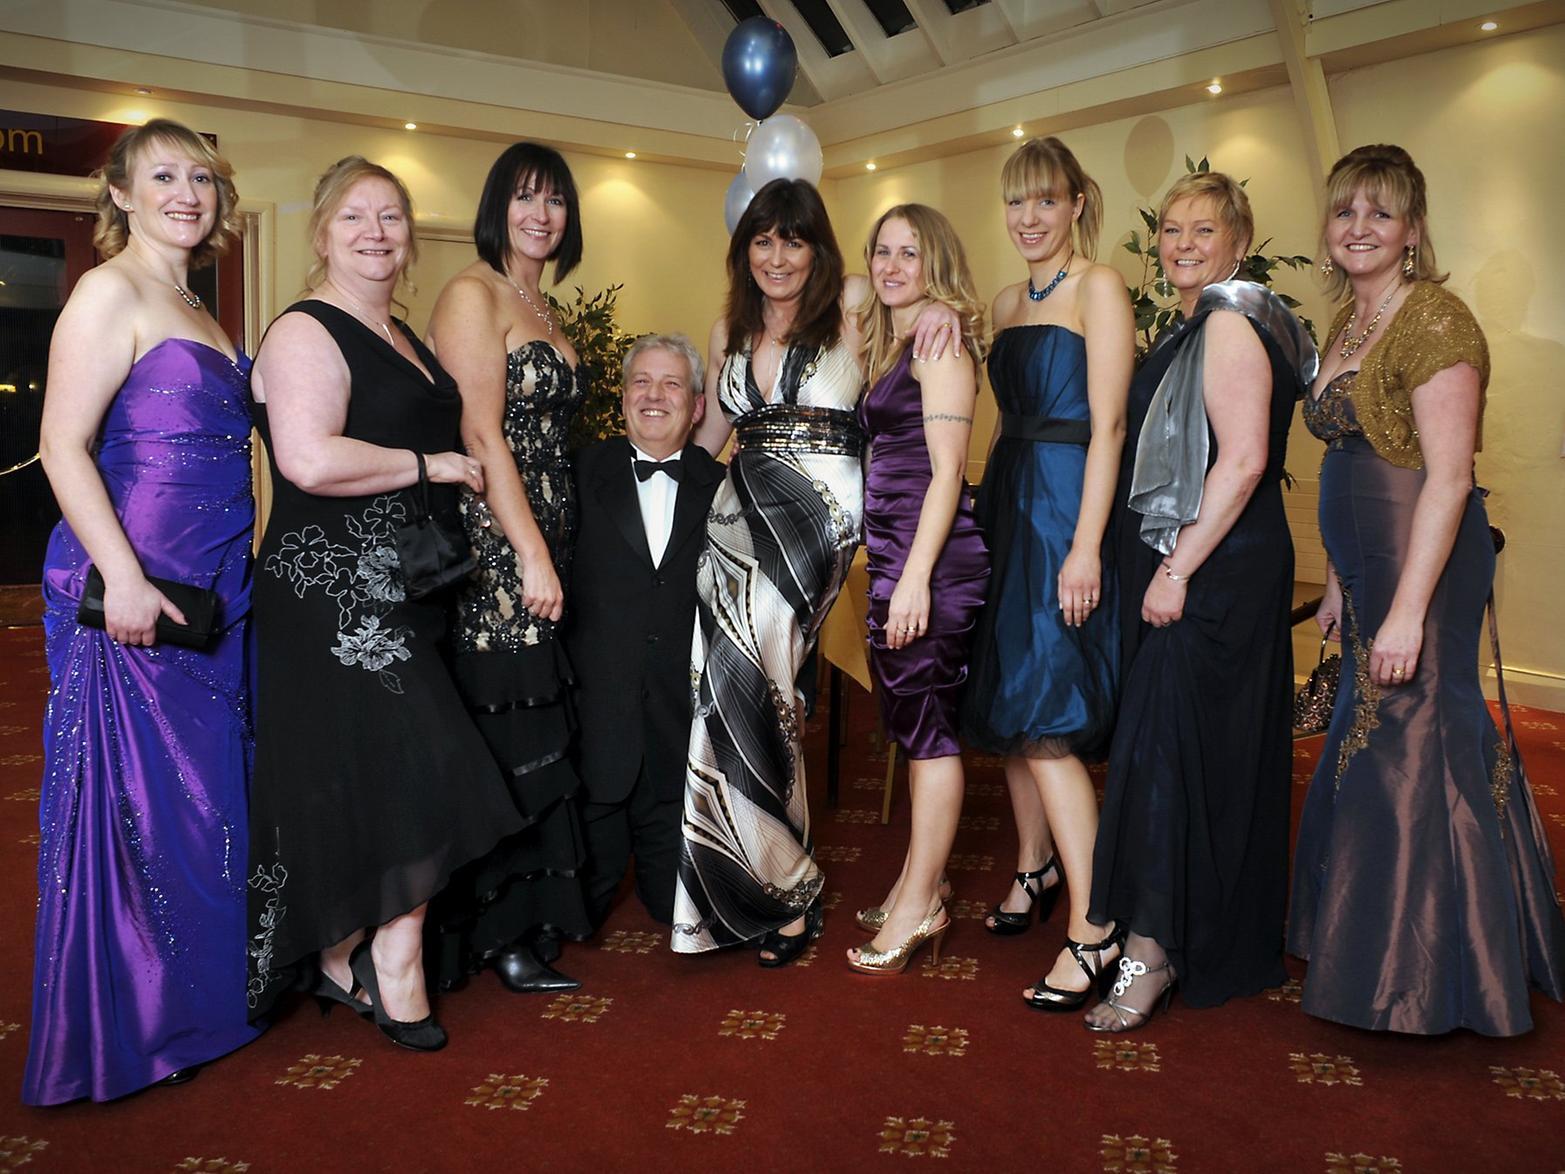 Tim Hopkirk, medical registrar, with the ladies from A&E.